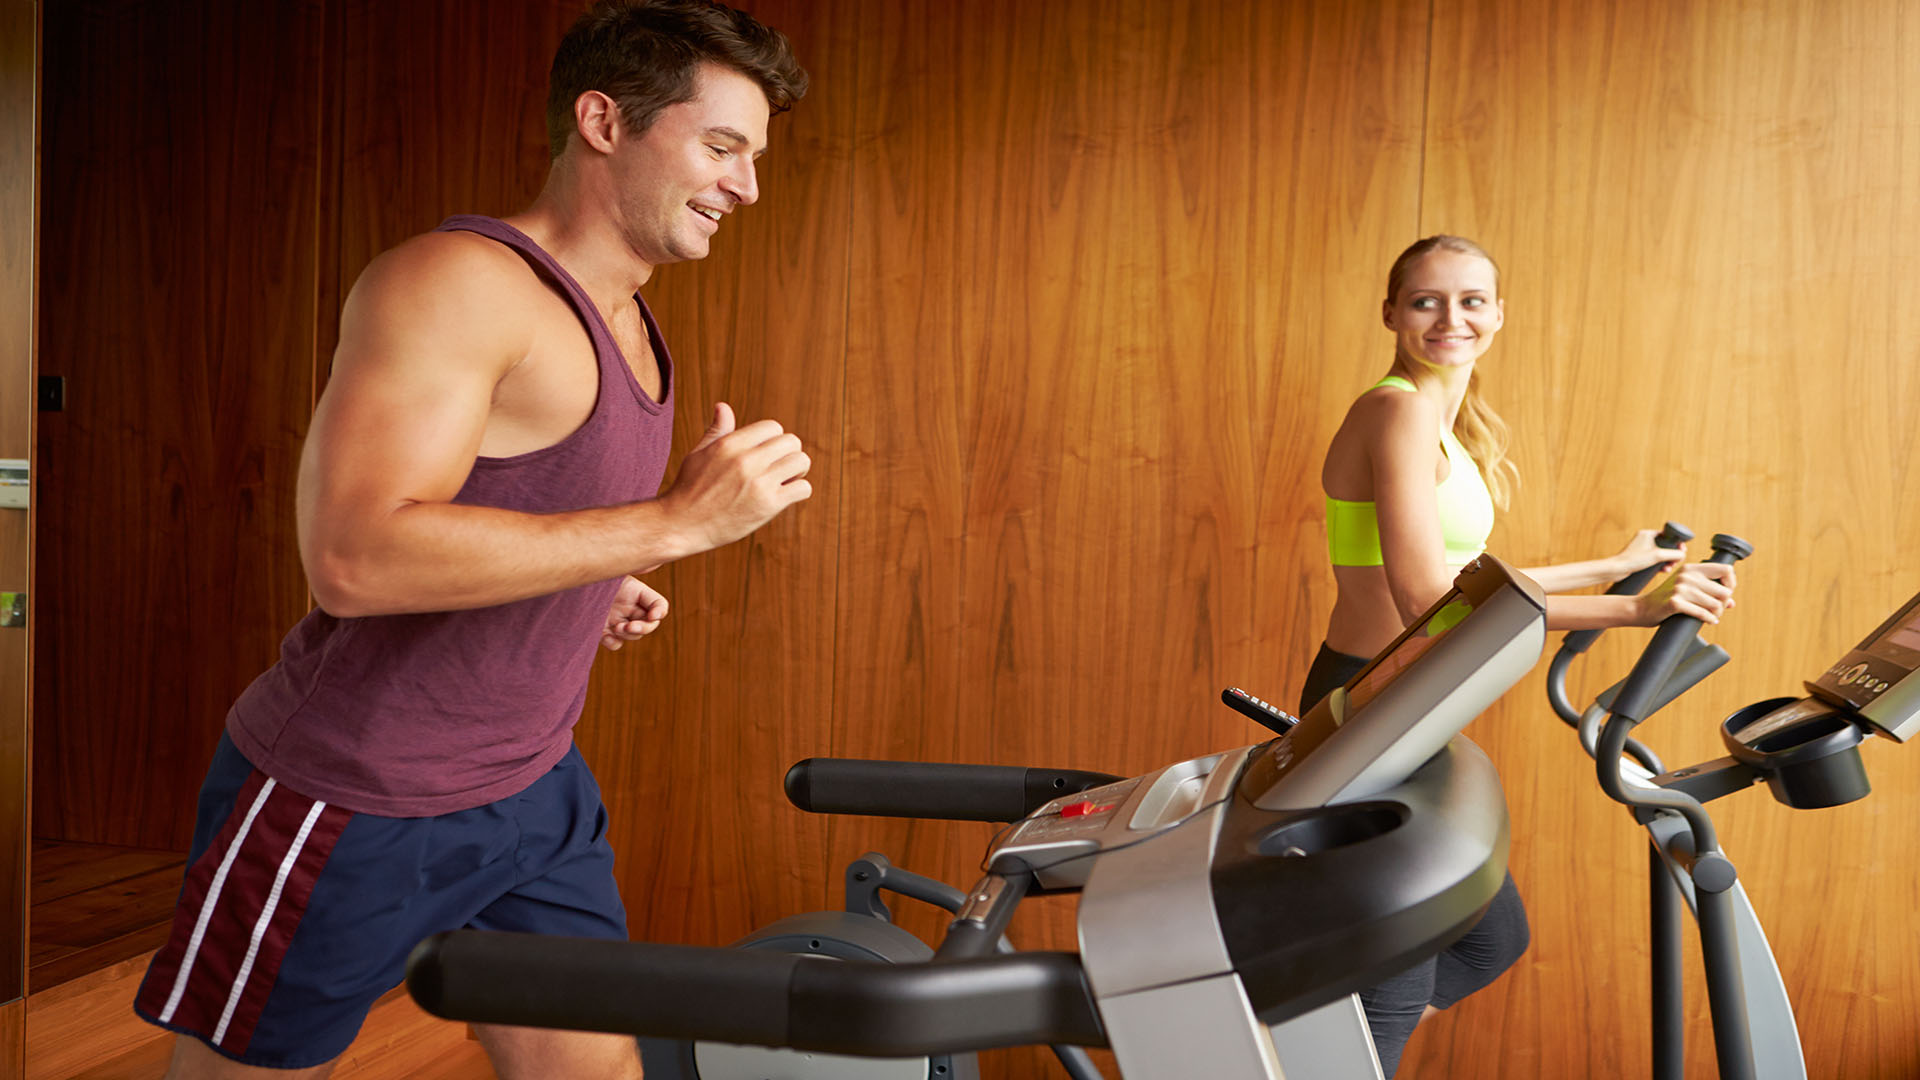 Home Exercise Options - Hire Treadmill From Brisbane's Best | Macrae